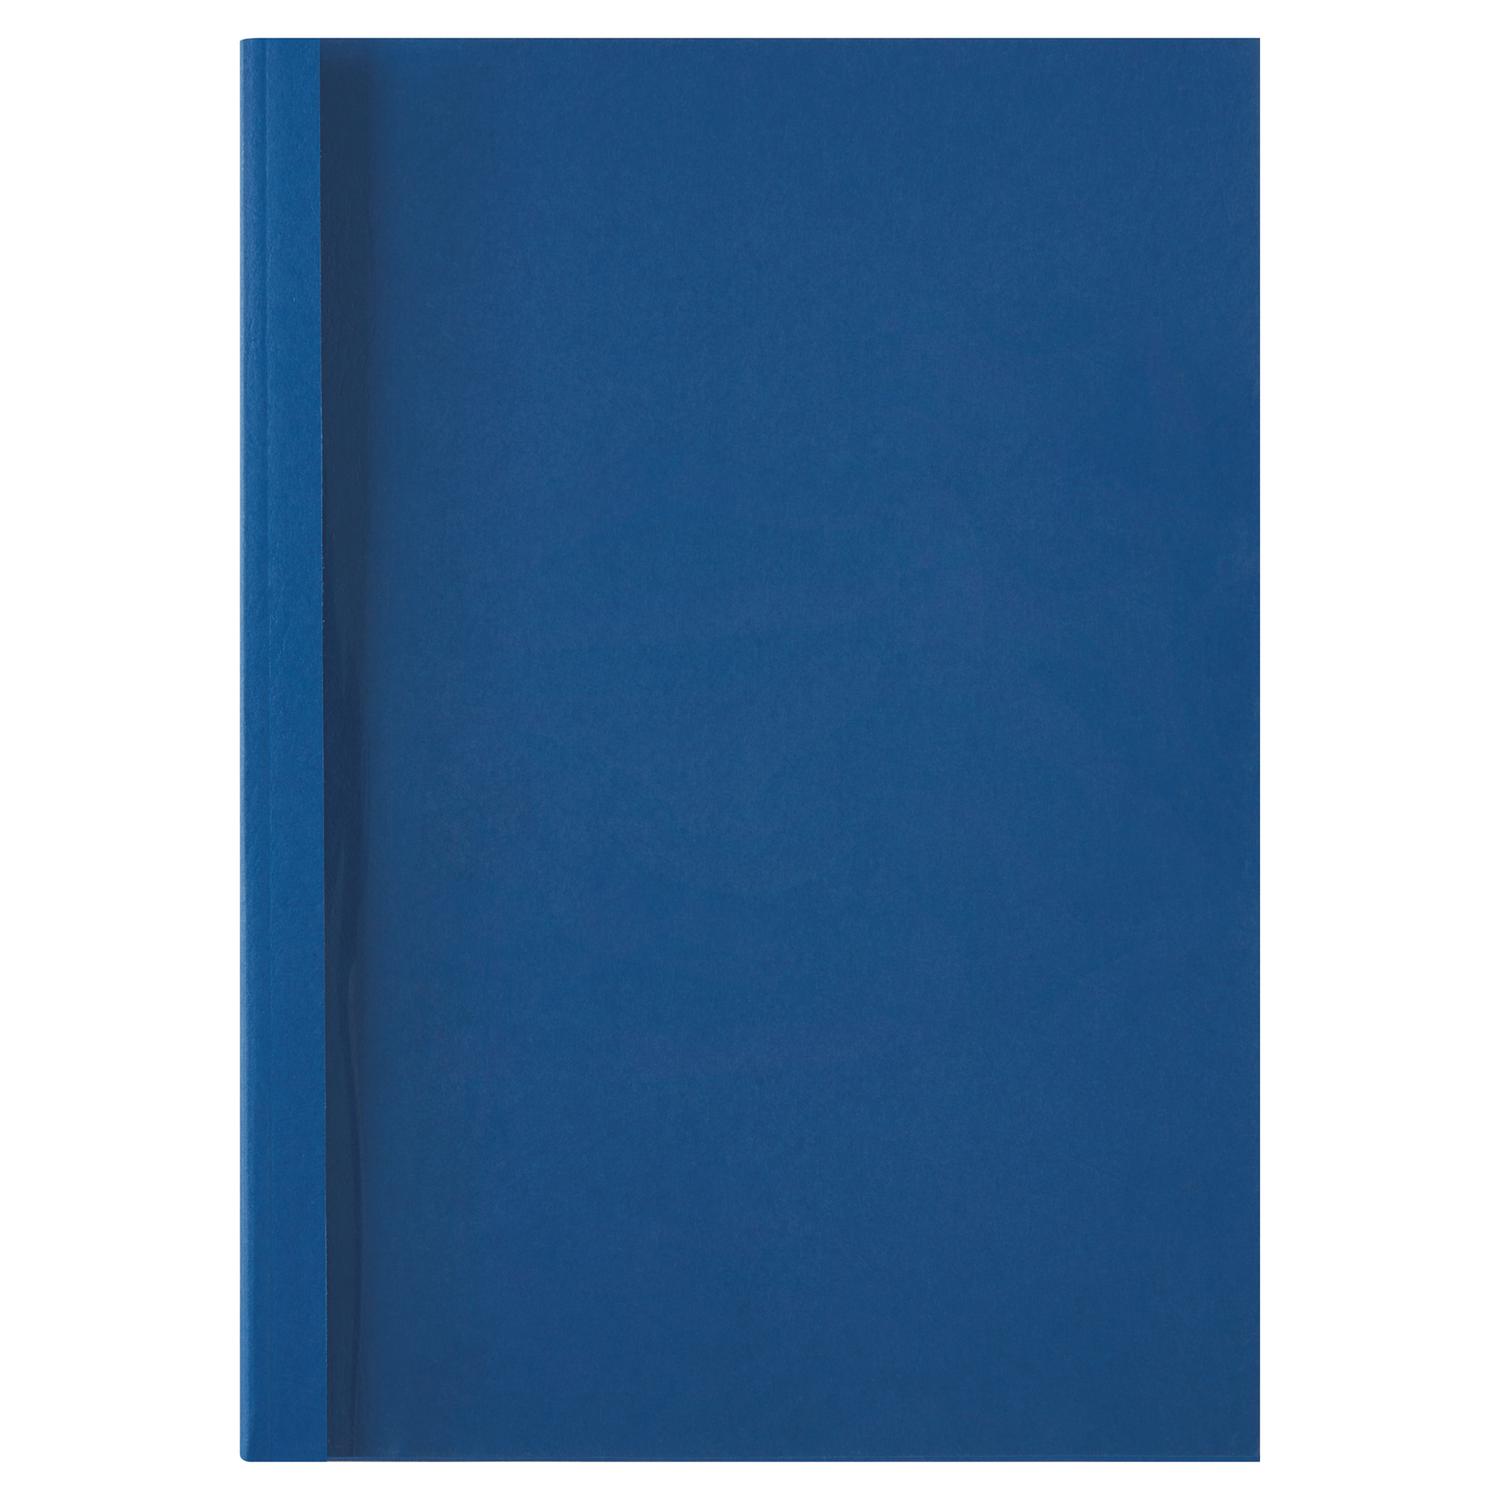 Thermal Bind Covers GBC Thermal Binding Cover A4 6mm Clear PVC Front Royal Blue Leathergrain Back (Pack 100)